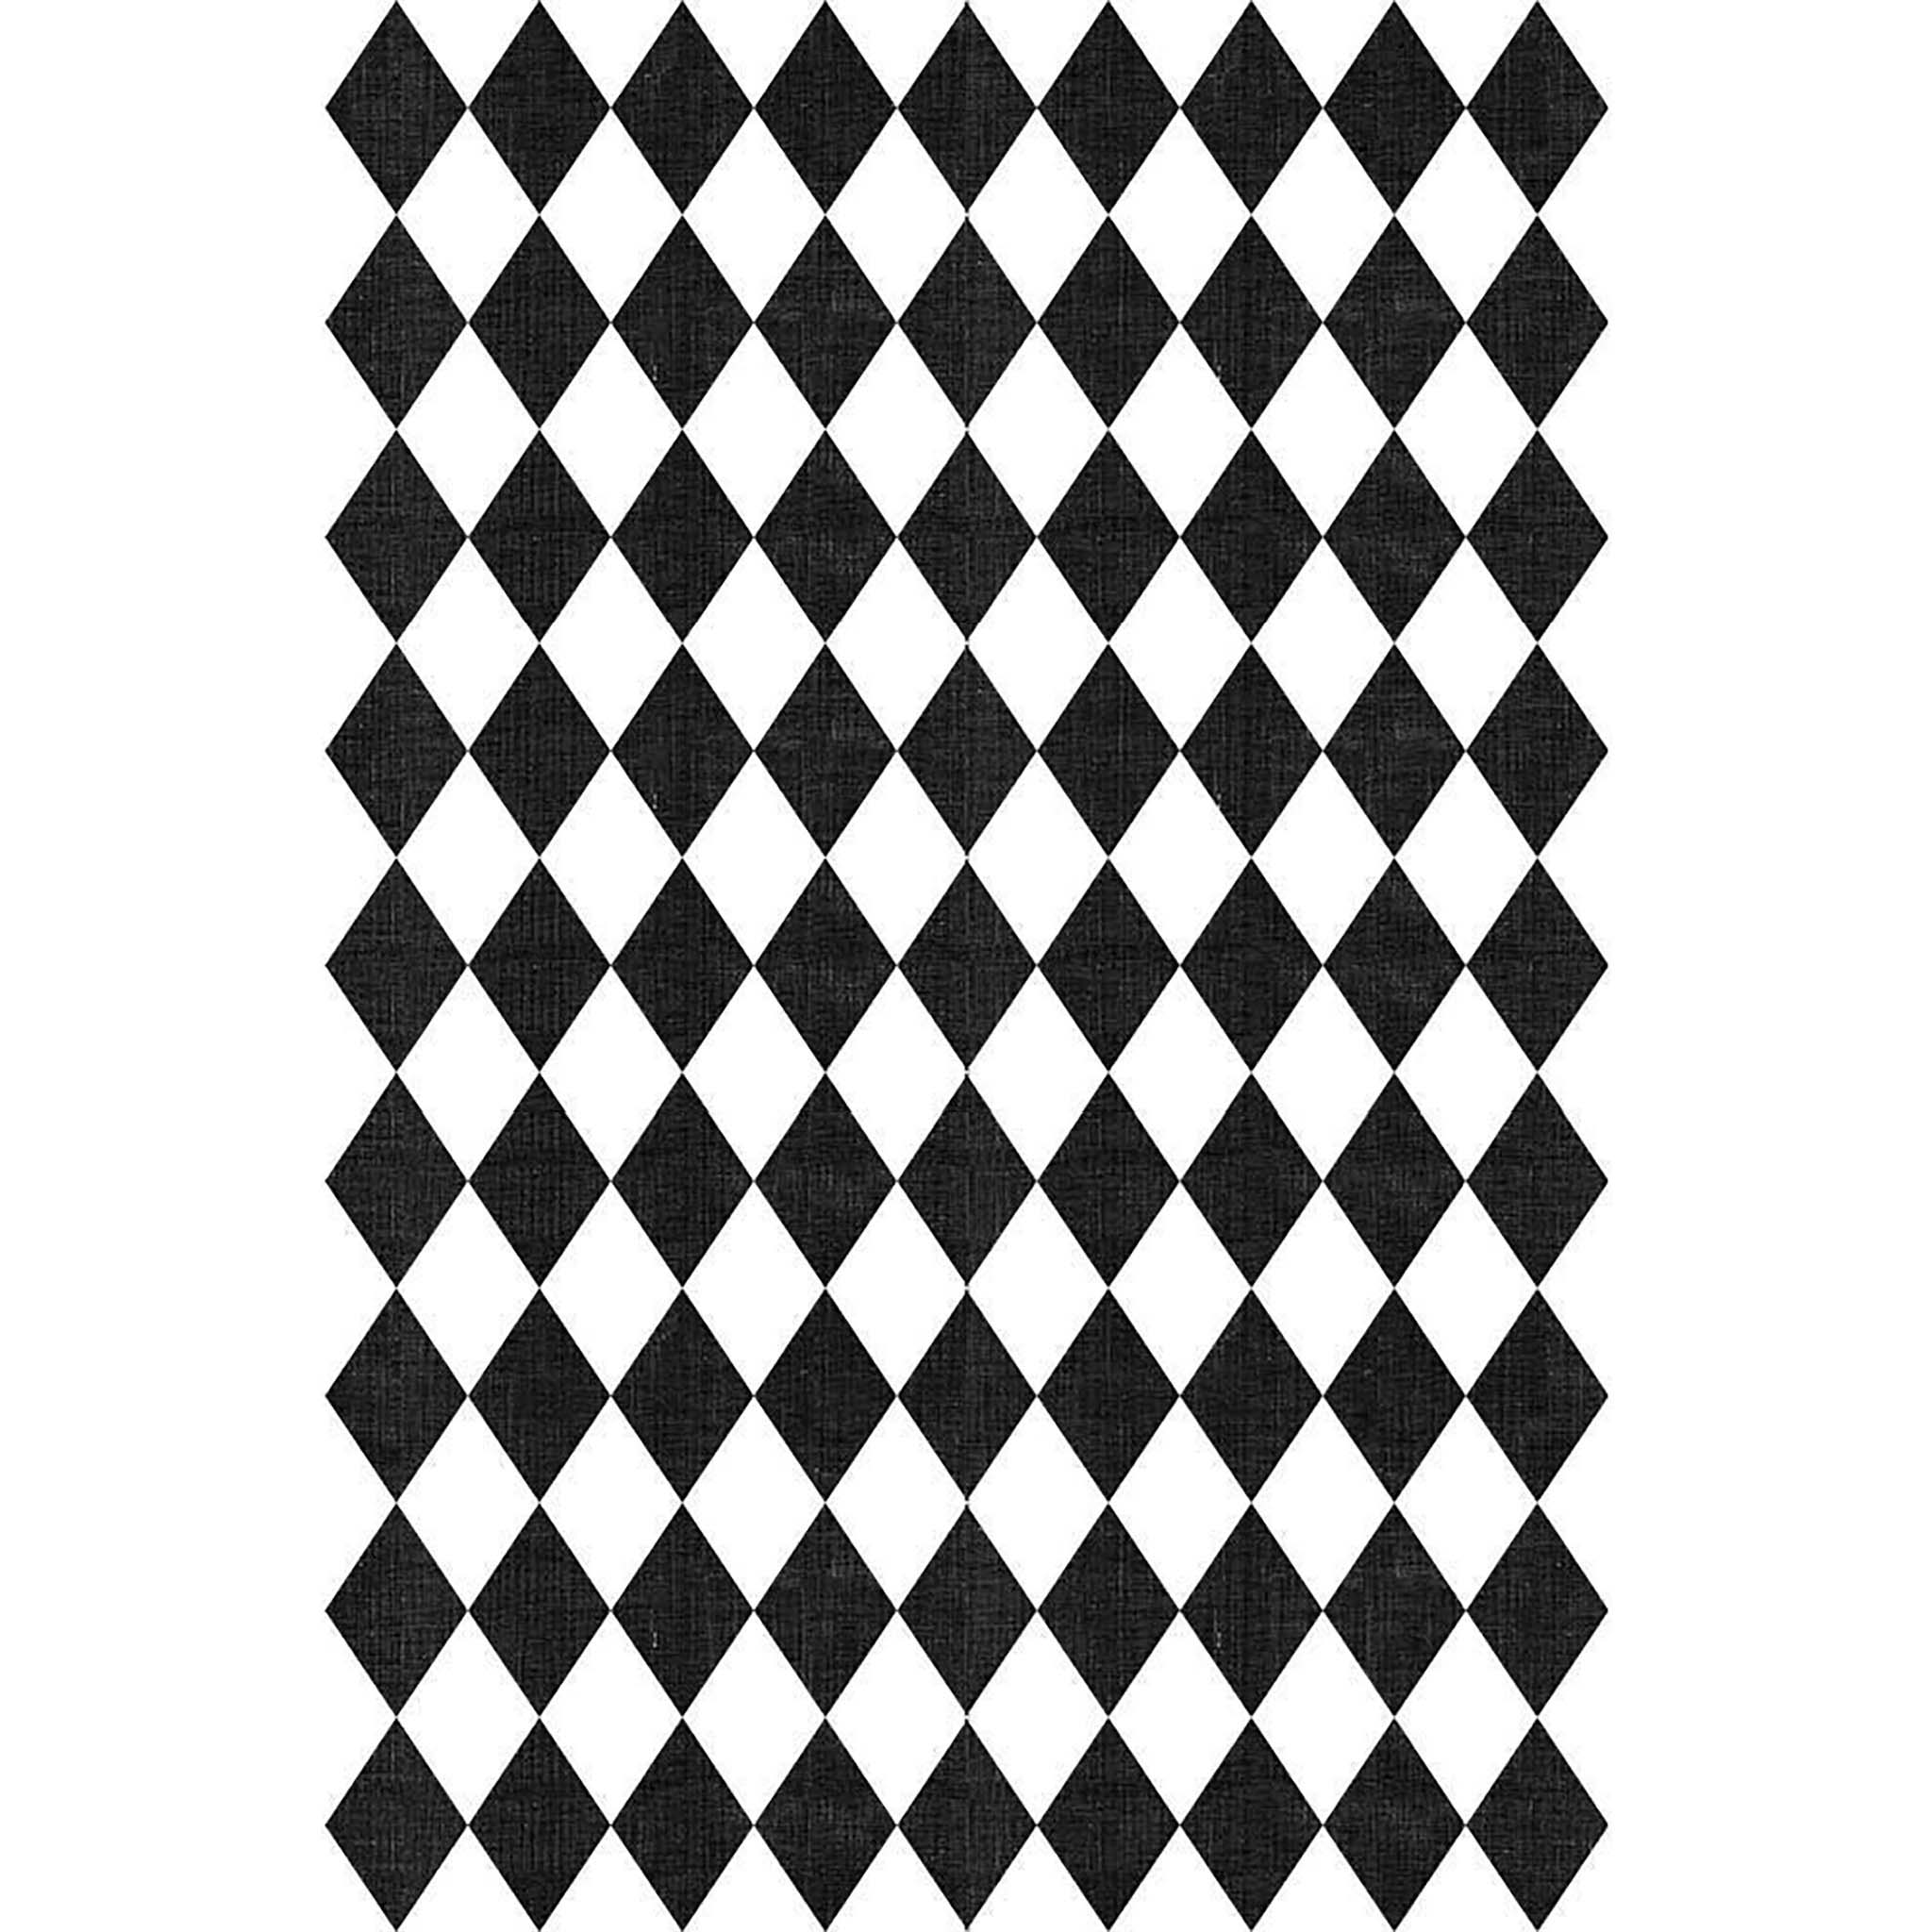 Large rub-on transfer design of a repeating black harlequin diamonds design against a white background.